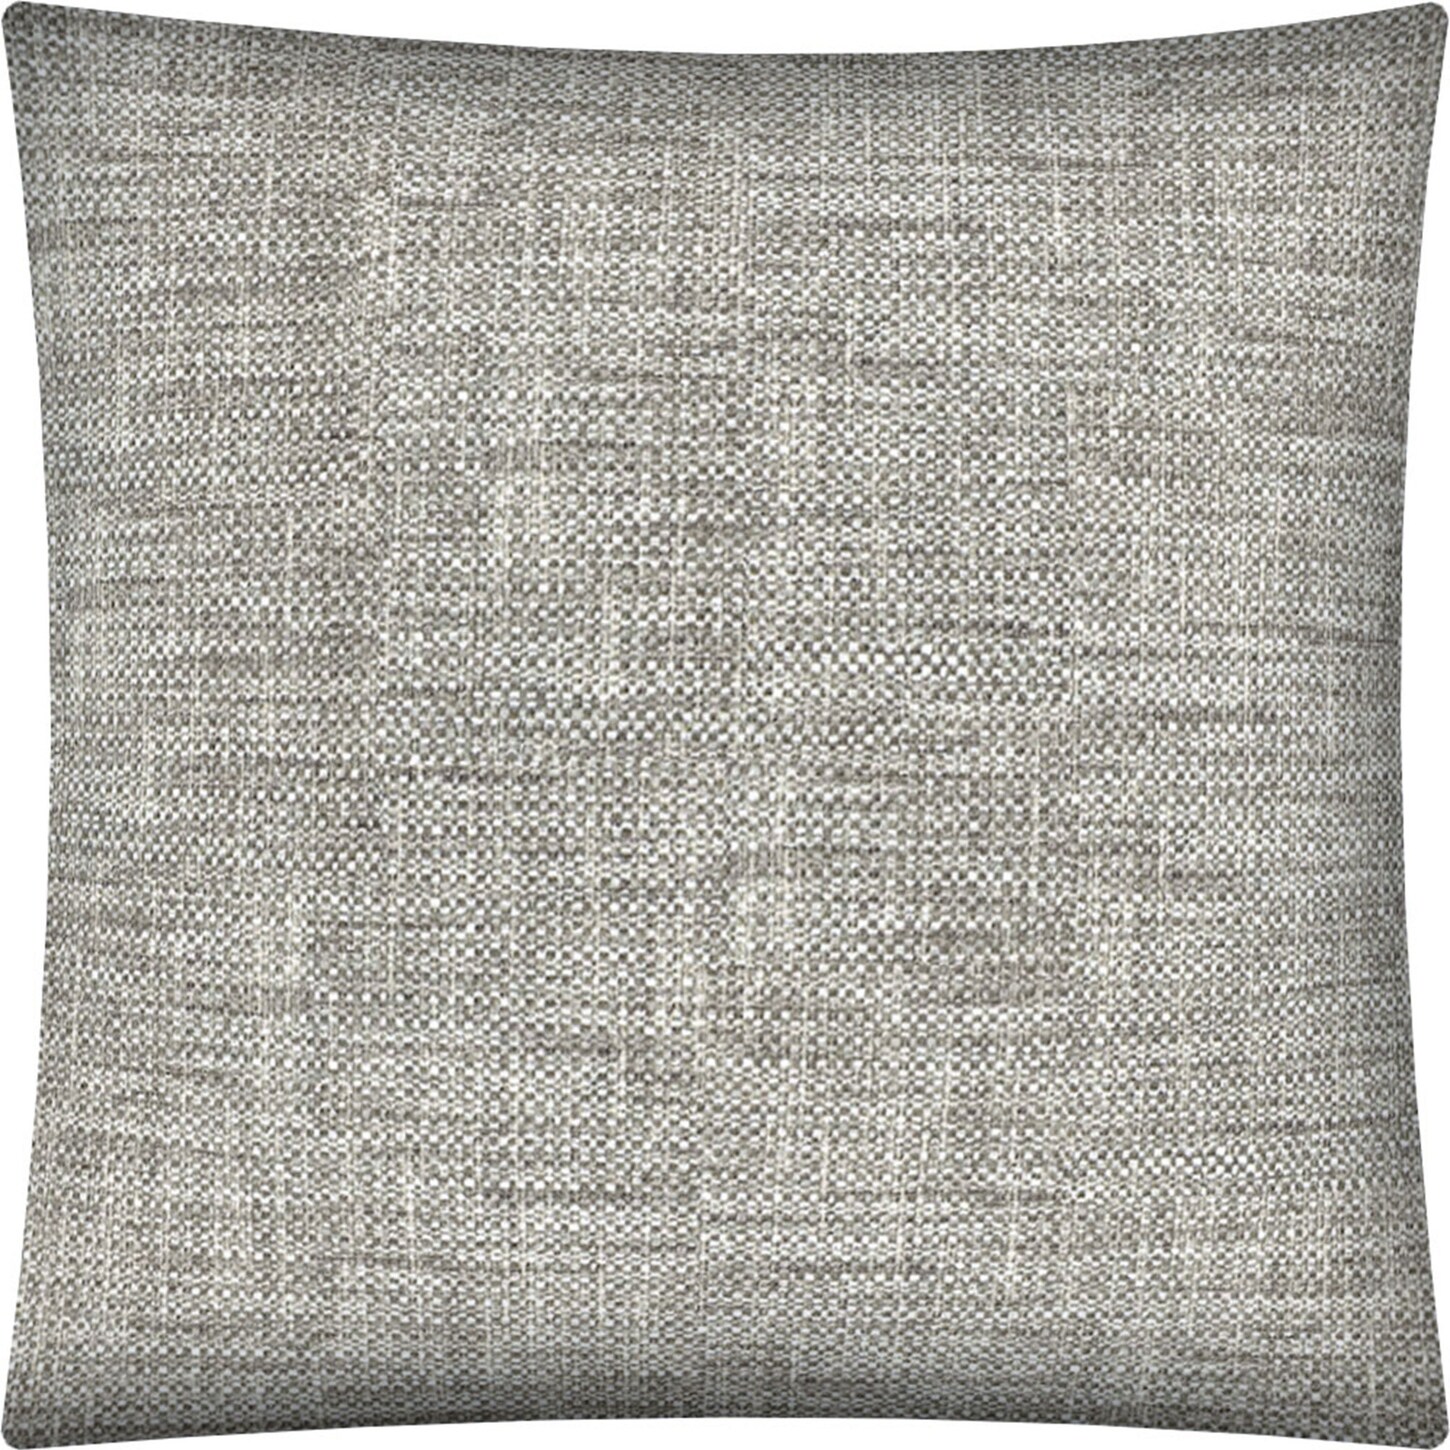 HomeRoots 17-in x 17-in Gray Indoor Decorative Cover in the Throw 